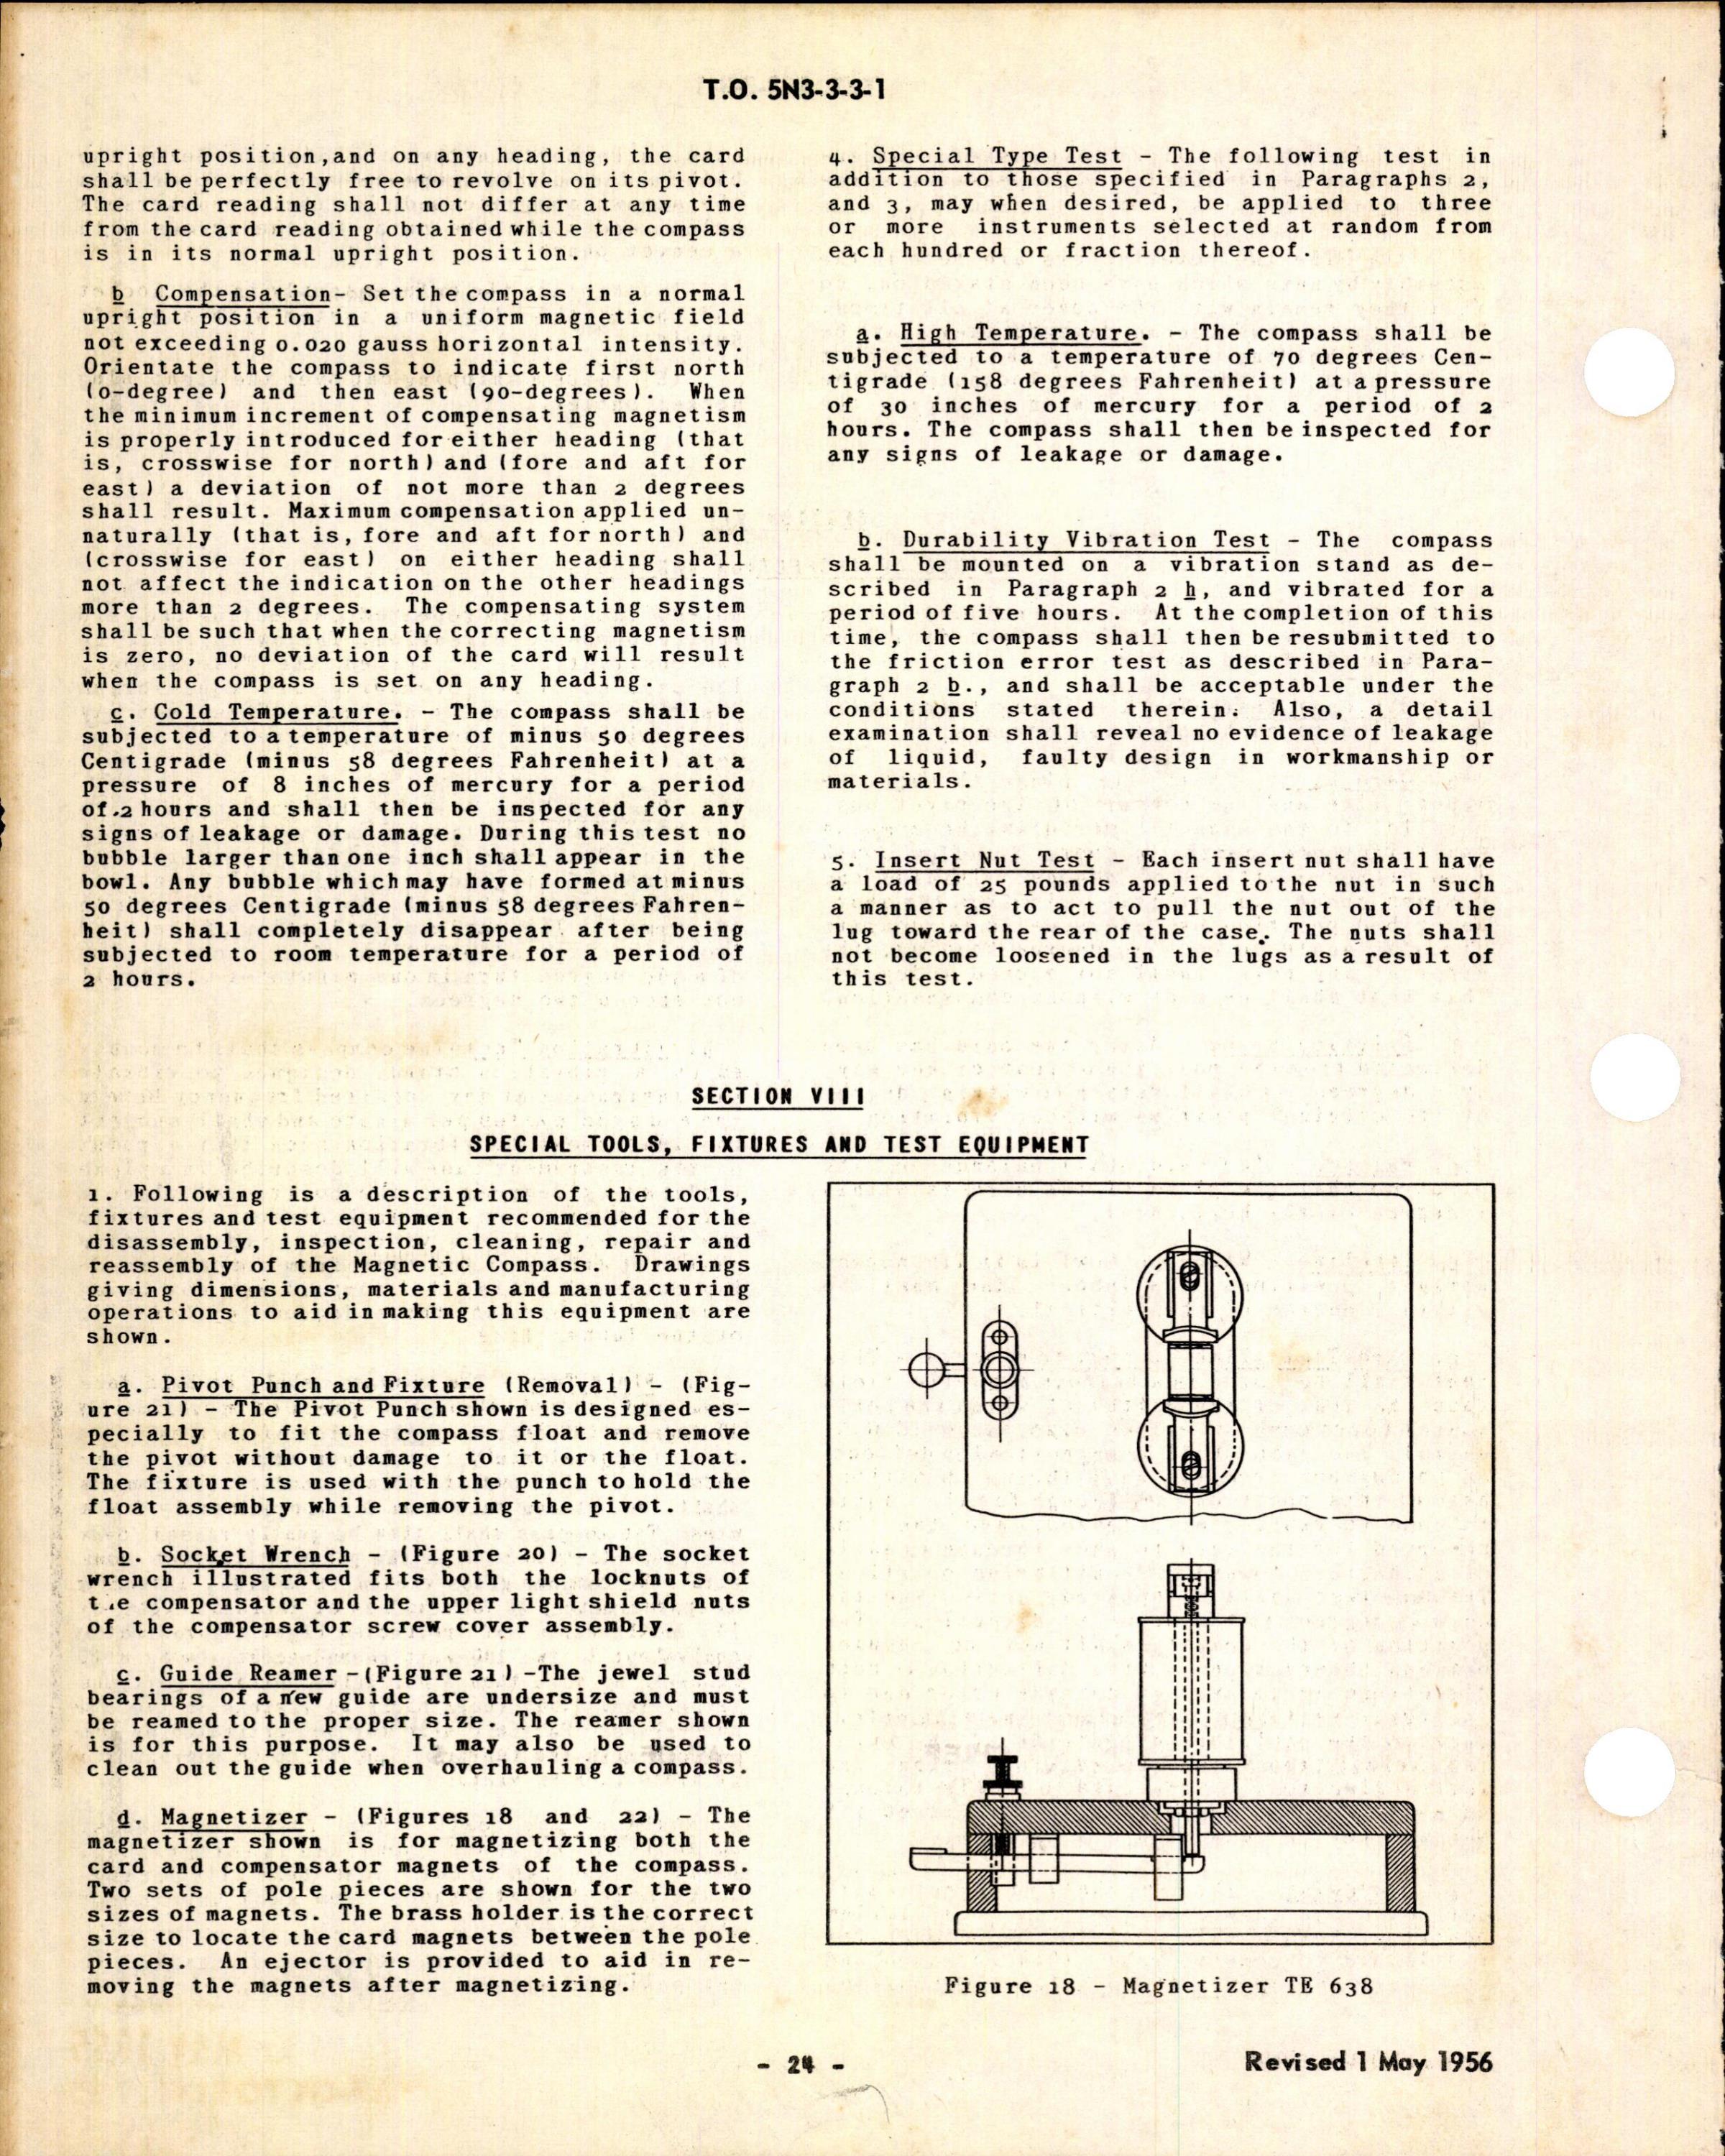 Sample page 4 from AirCorps Library document: Handbook of Instructions with Parts Catalog for Type B-16 Pilot's Compass